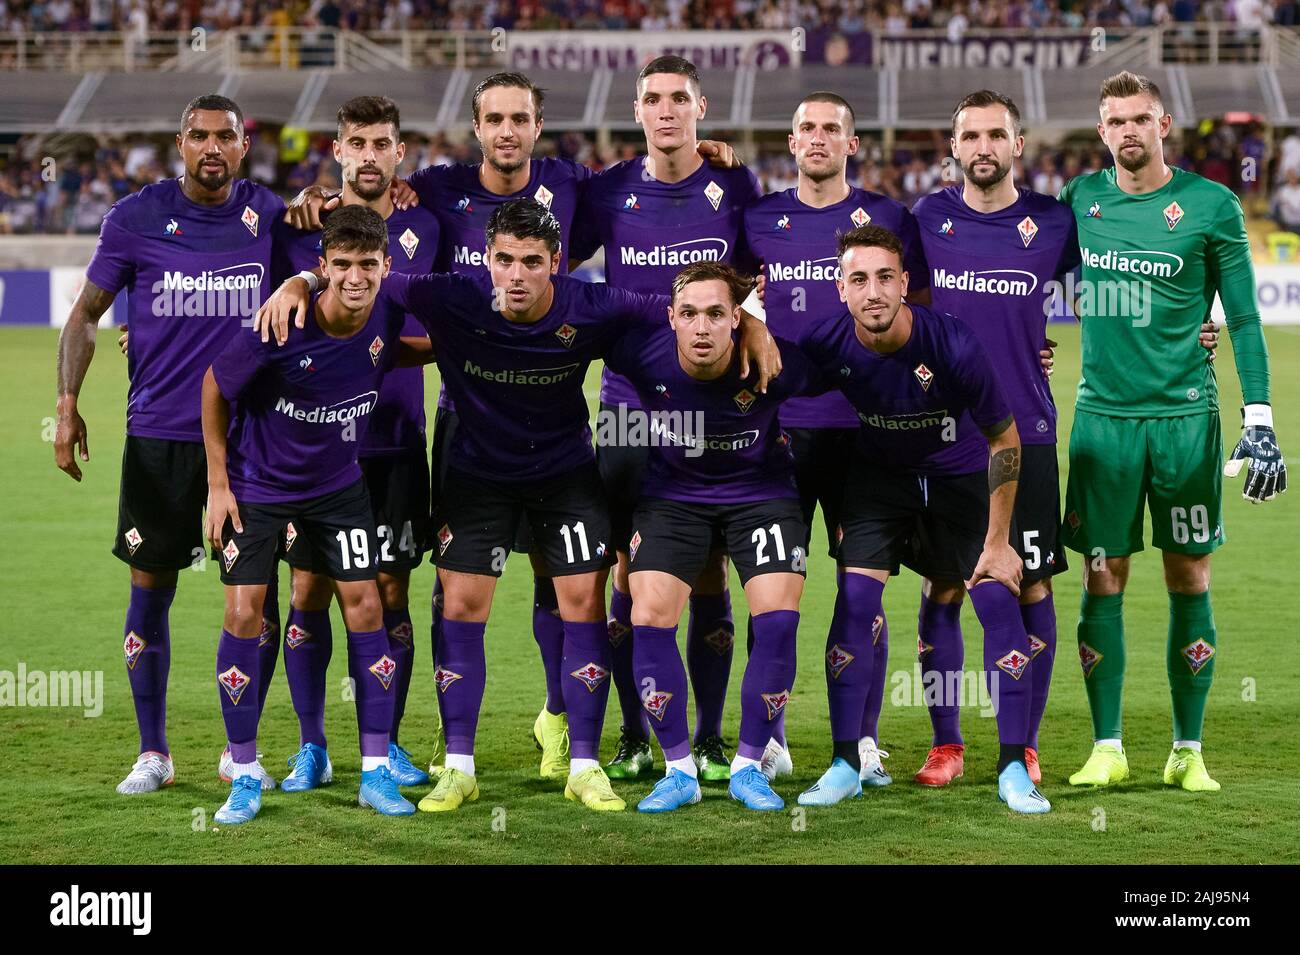 Florence, Italy. 11 August, 2019: Players of ACF Fiorentina pose for a team photo prior to the pre-season friendly football match between ACF Fiorentina and Galatasaray SK. ACF Fiorentina won 4-1 over Galatasaray SK. Credit: Nicolò Campo/Alamy Live News Stock Photo